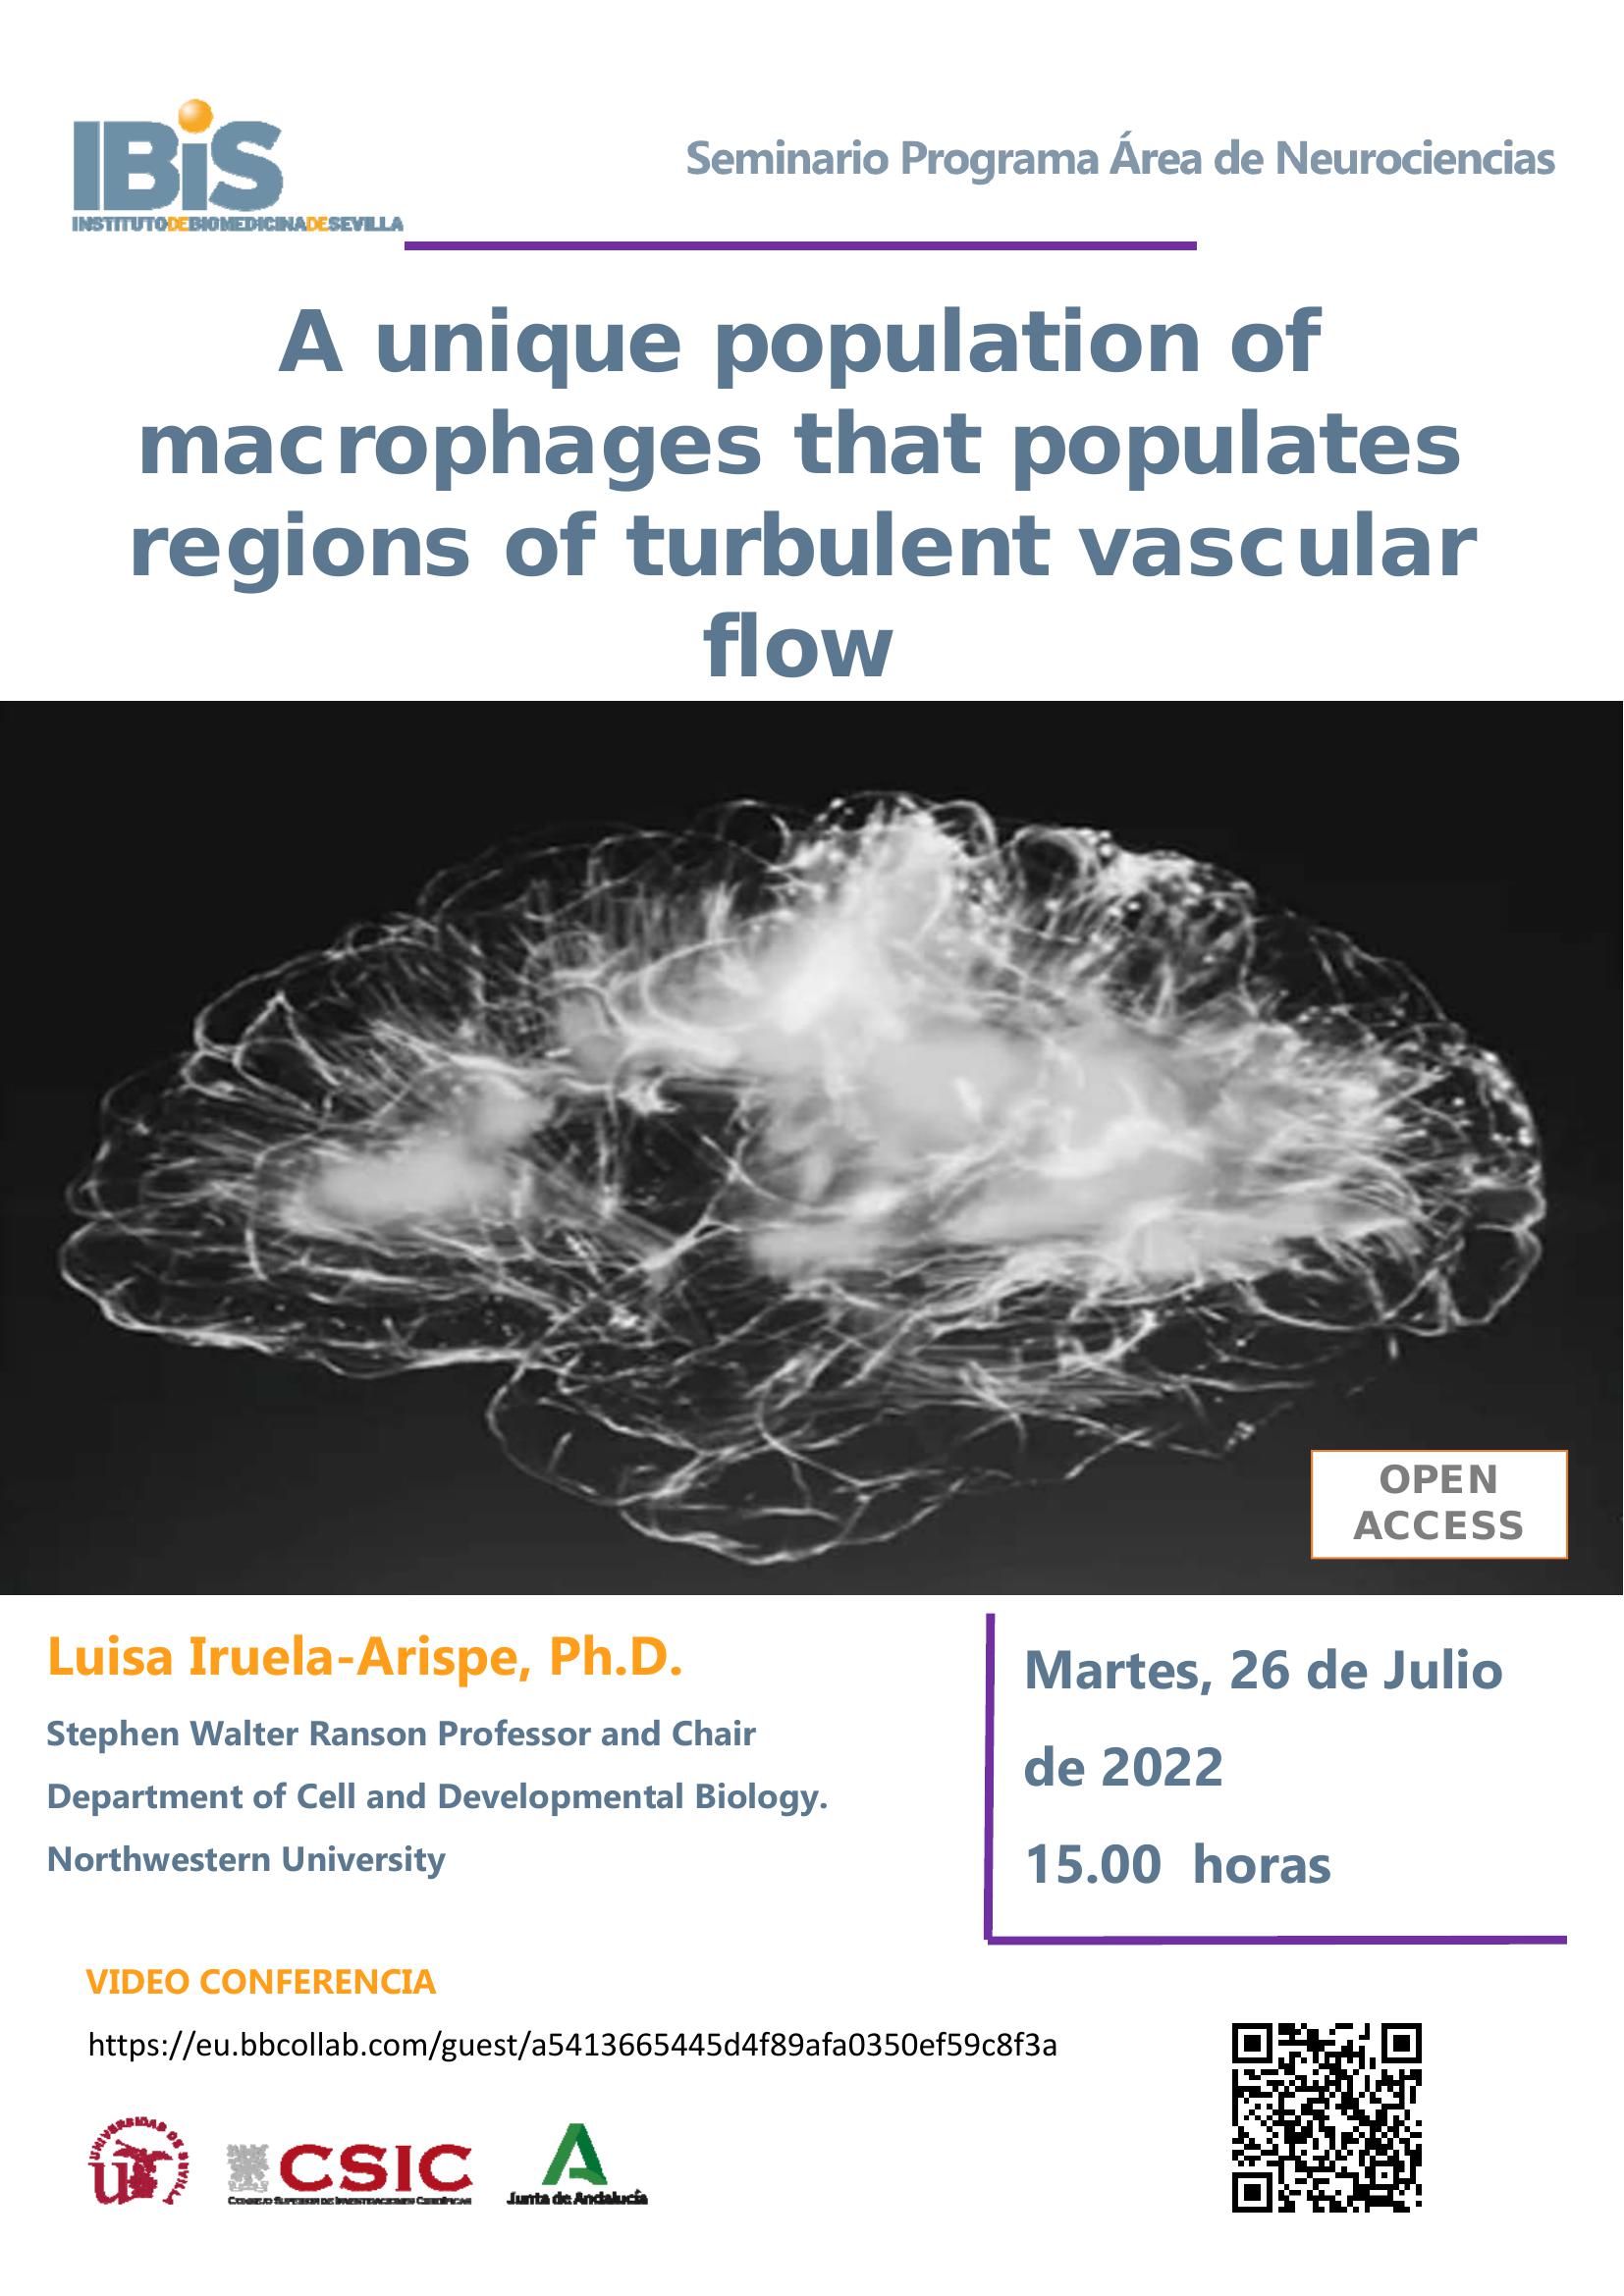 Poster: A unique population of macrophages that populates regions of turbulent vascular flow